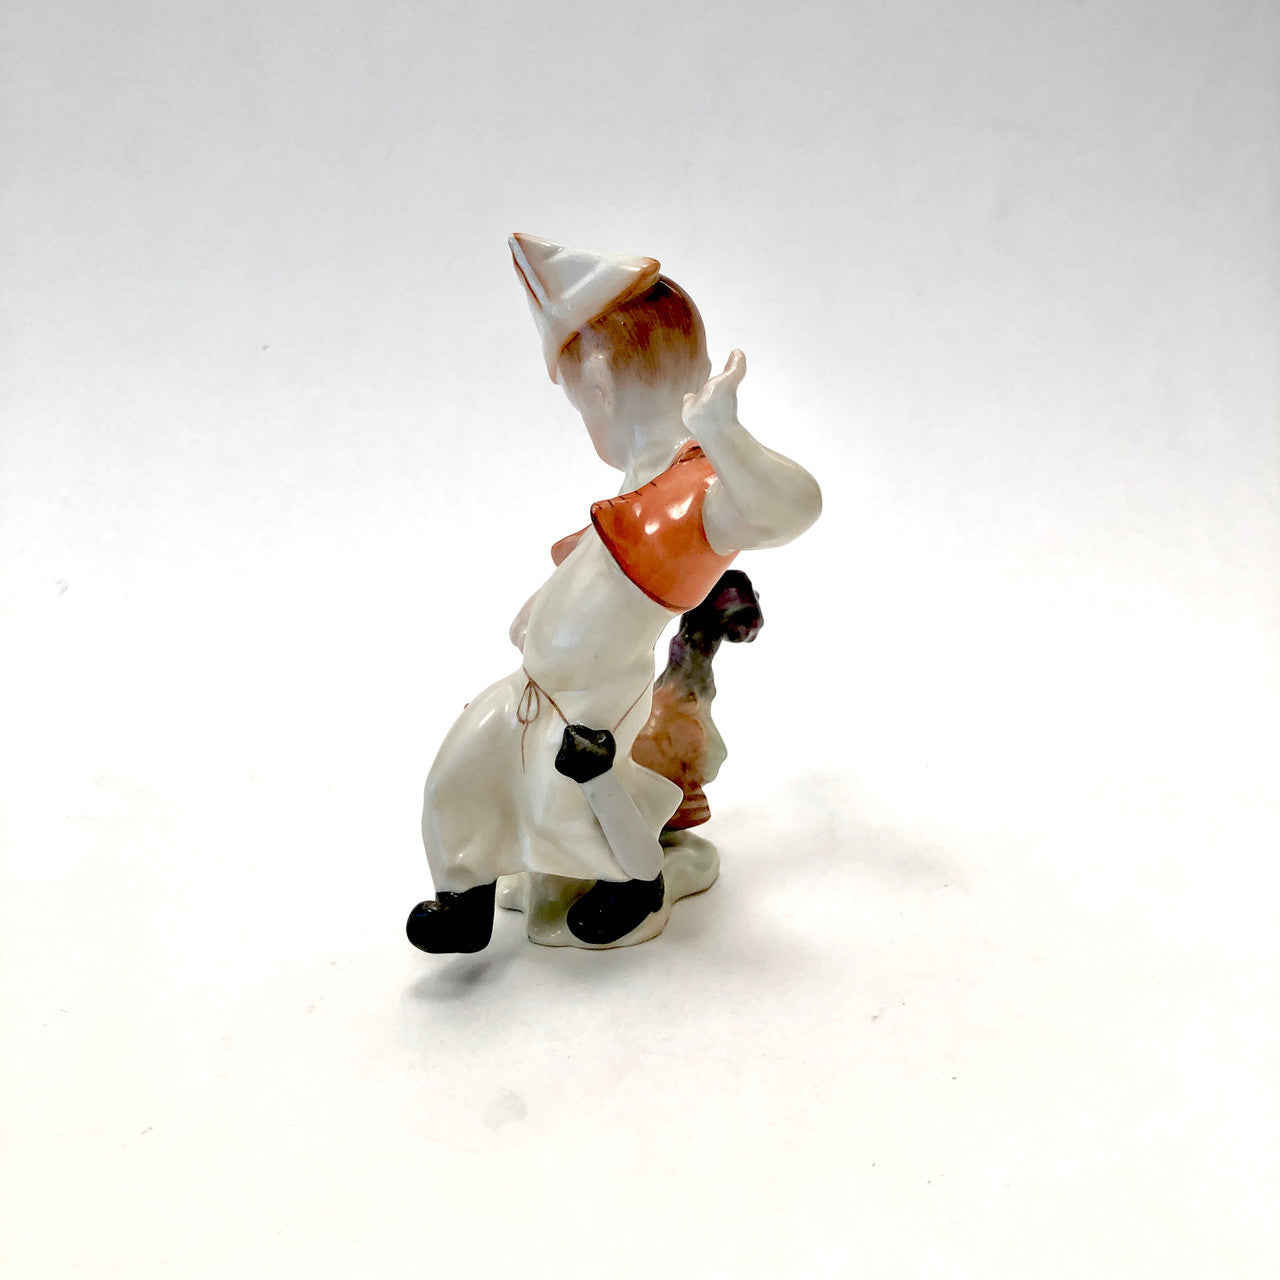 Herend, 5842, Figurine, Child, Boy, with Chicken, Hungary, Porcelain, Vintage, Mid-Century,